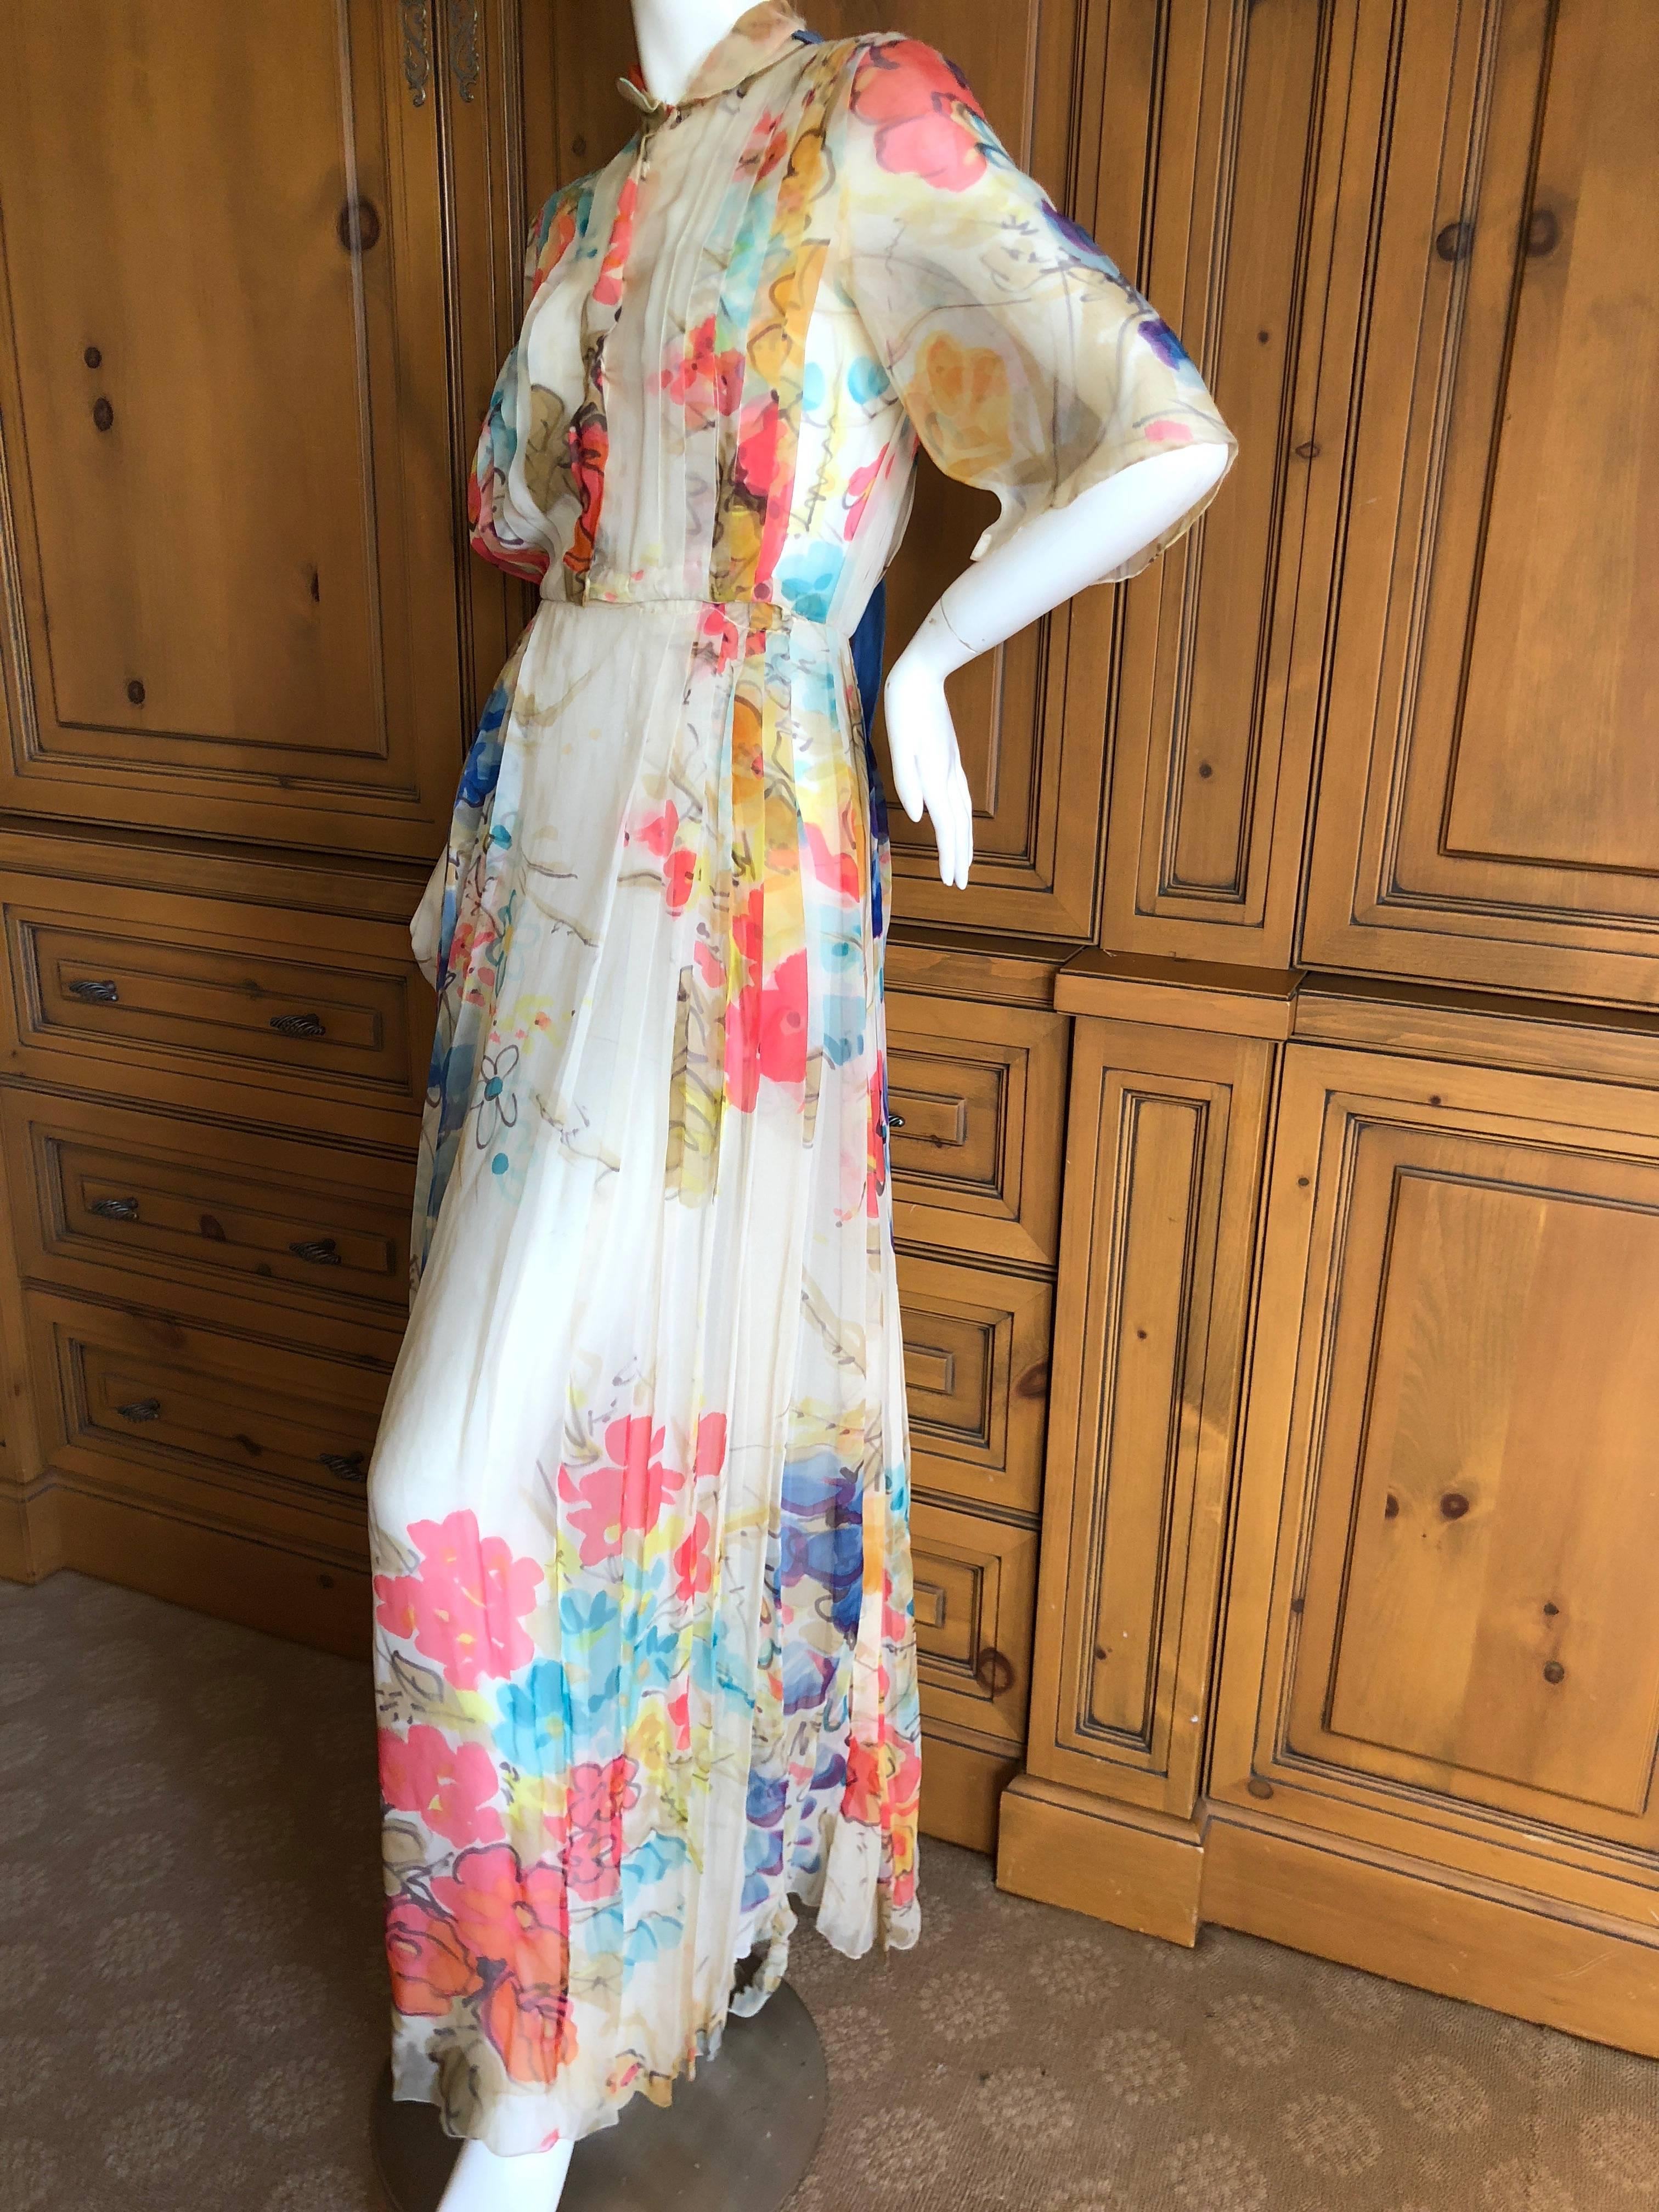 Cardinali Elegant Pleated Ivory Floral Silk Short Sleeve Evening Dress.

From the Archive of Marilyn Lewis, the creator of Cardinali
Cardinali was founded in Los Angeles in 1970, by Marilyn Lewis, who had already found success as the founder and